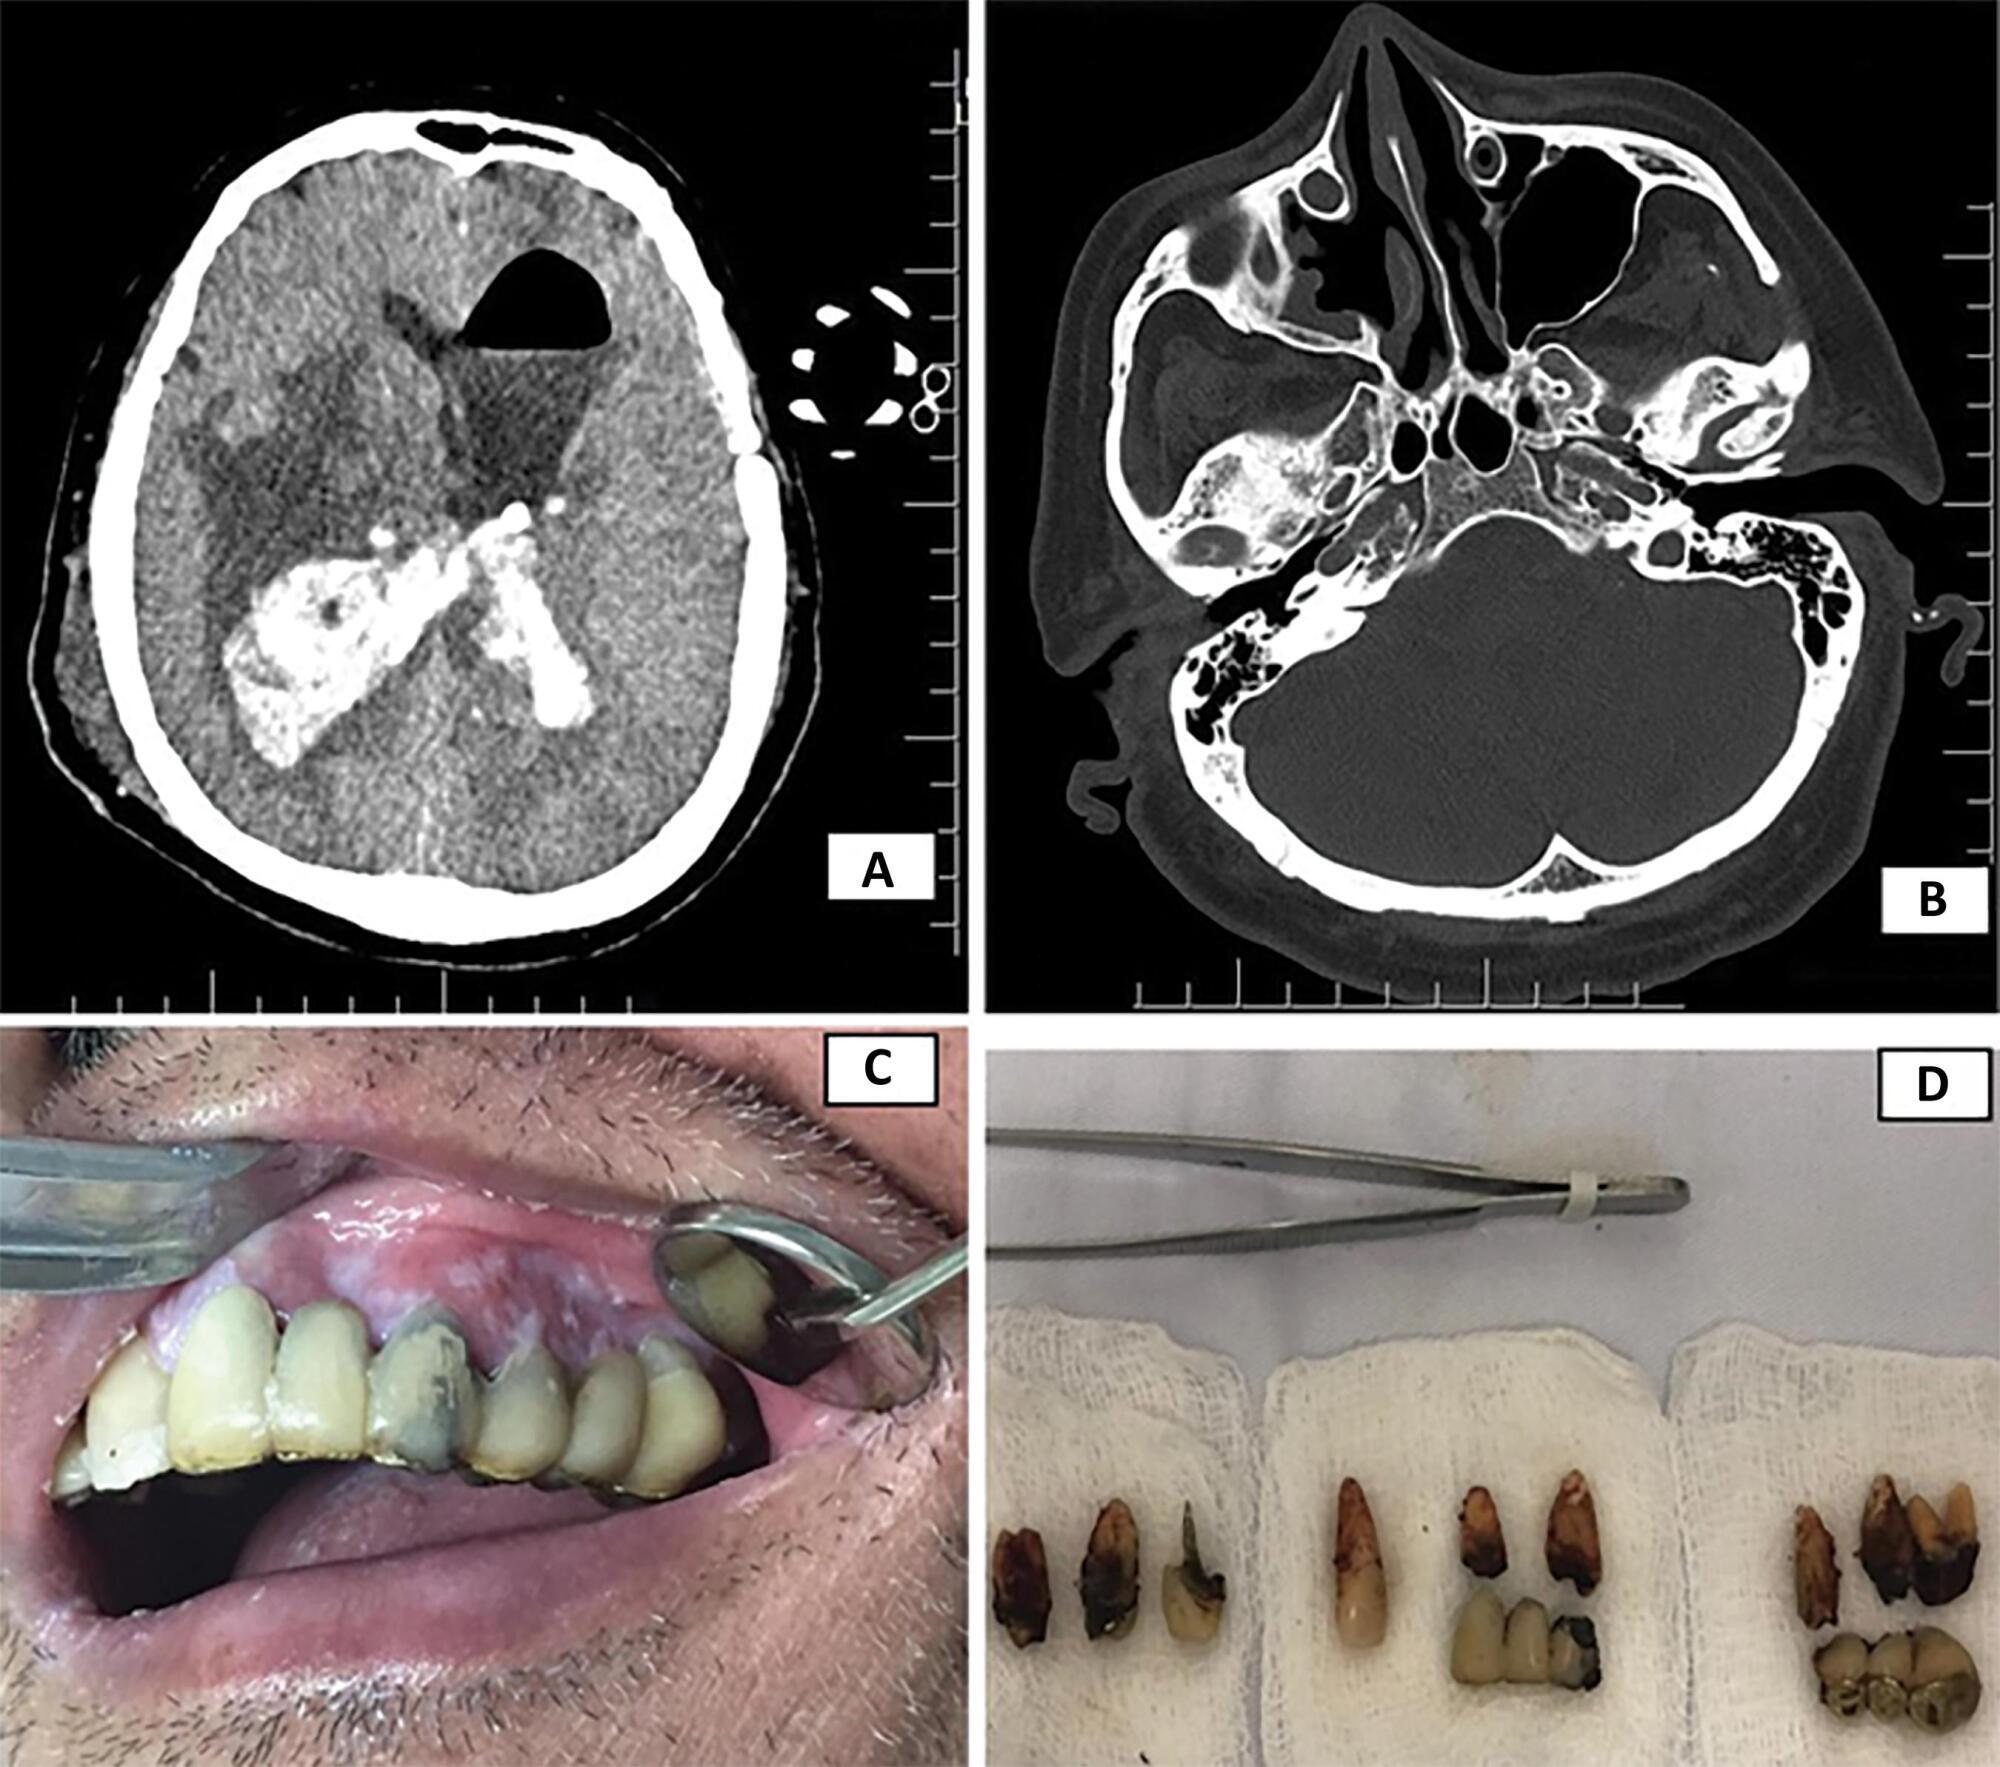 Brain abscess and odontogenic infection